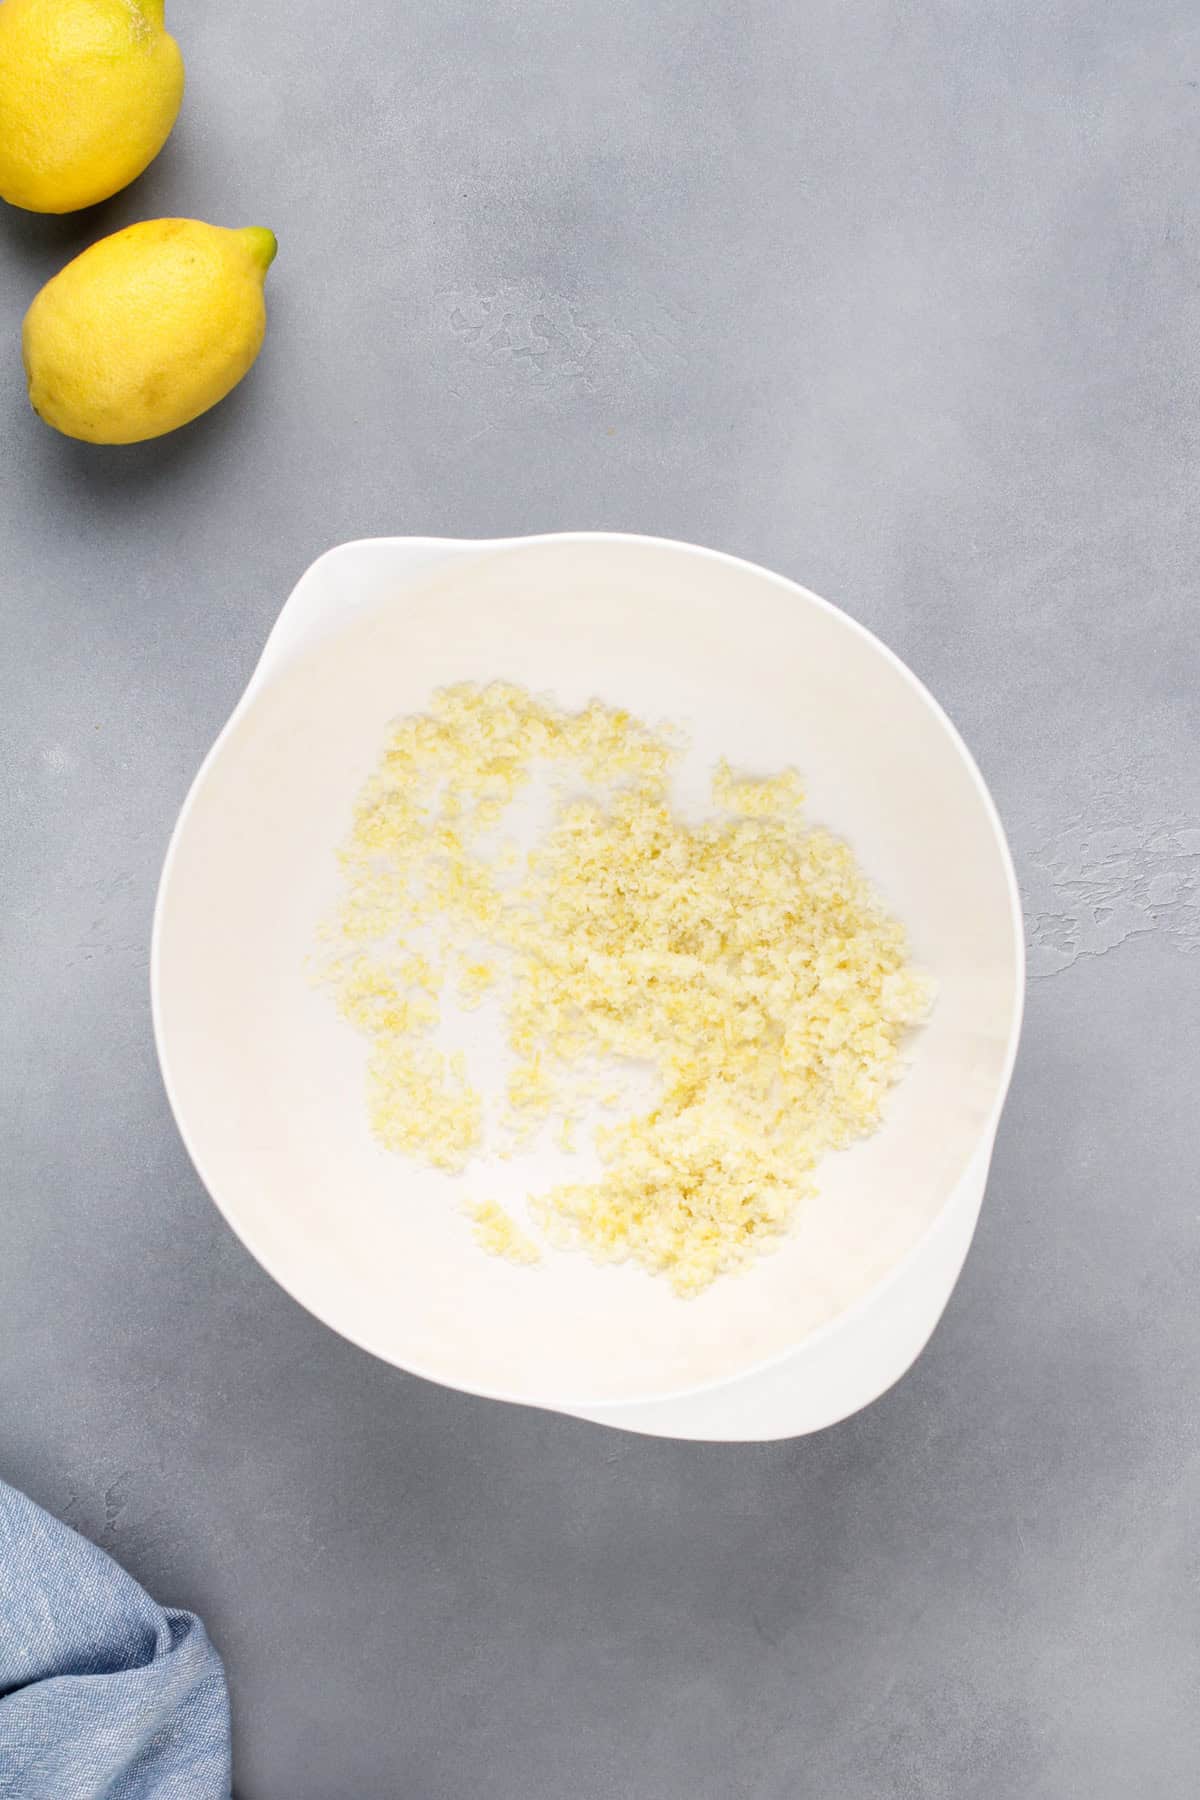 Lemon zest and sugar combined in a white mixing bowl.